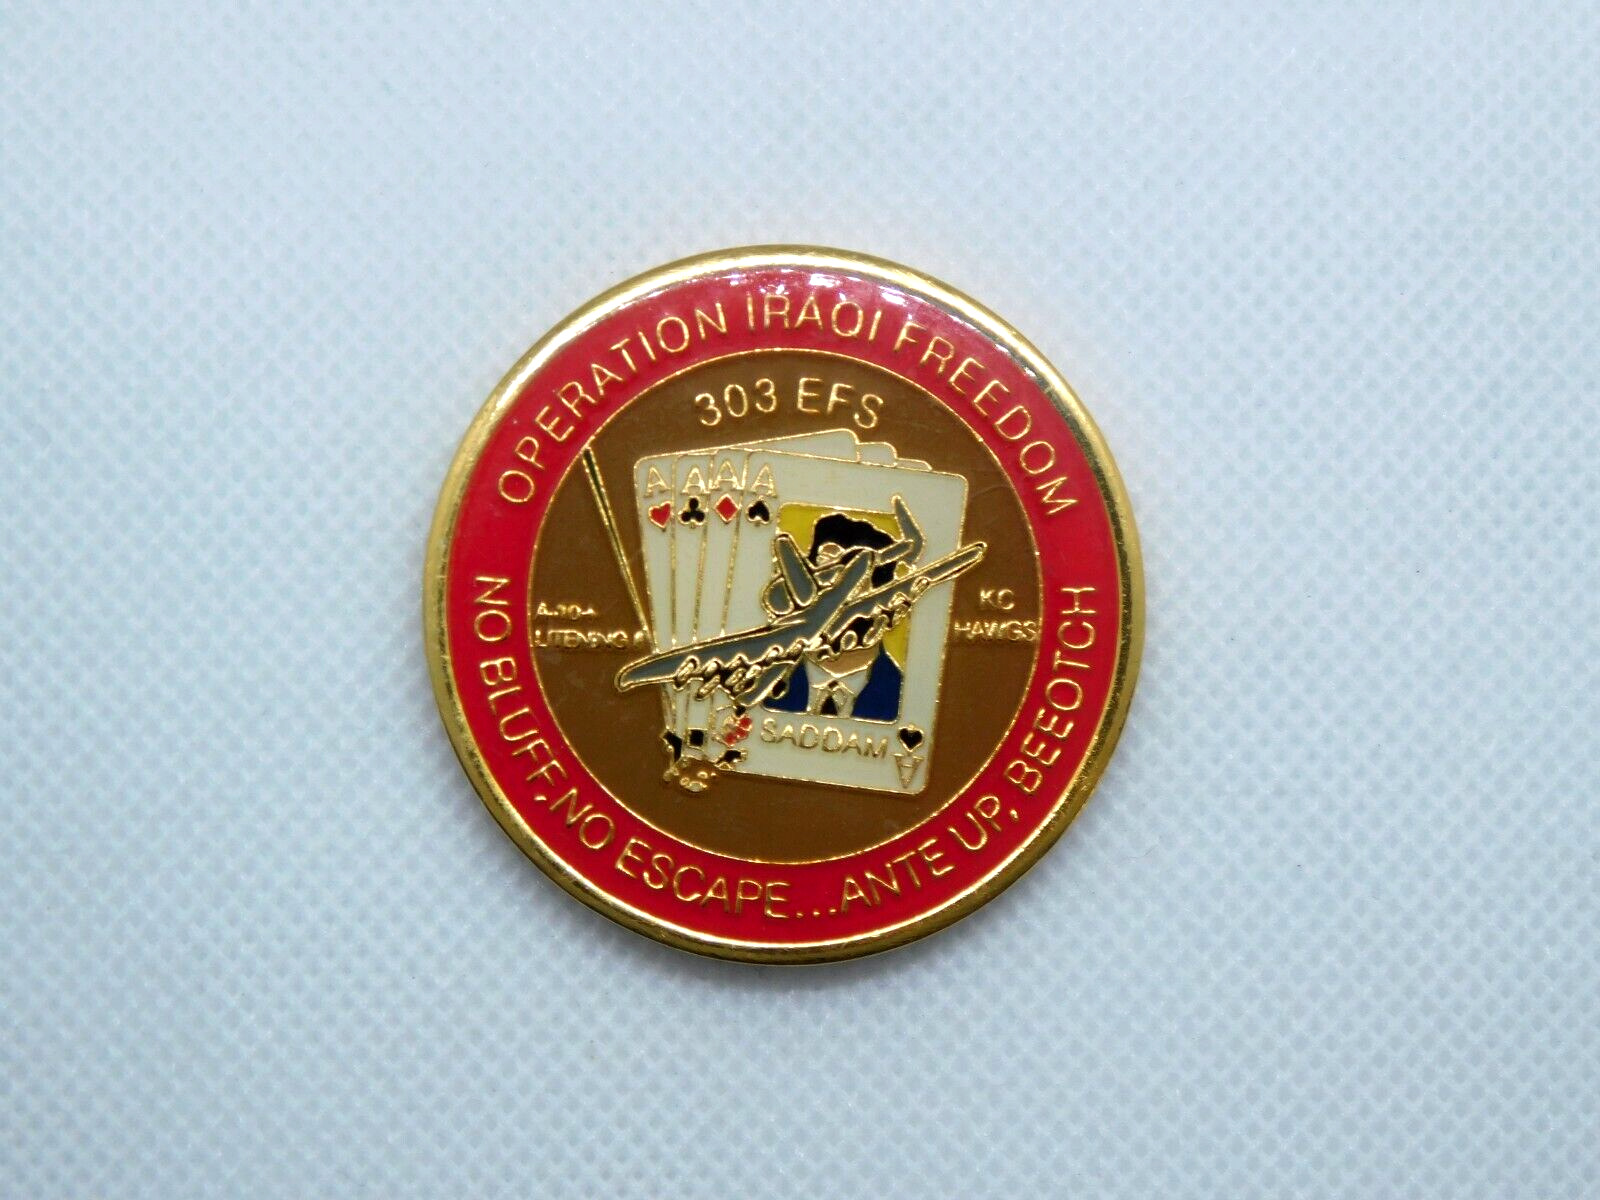 USAF 303 Fighter Squadron EFS A-10 2003 Iraqi Freedom OIF Challenge Coin